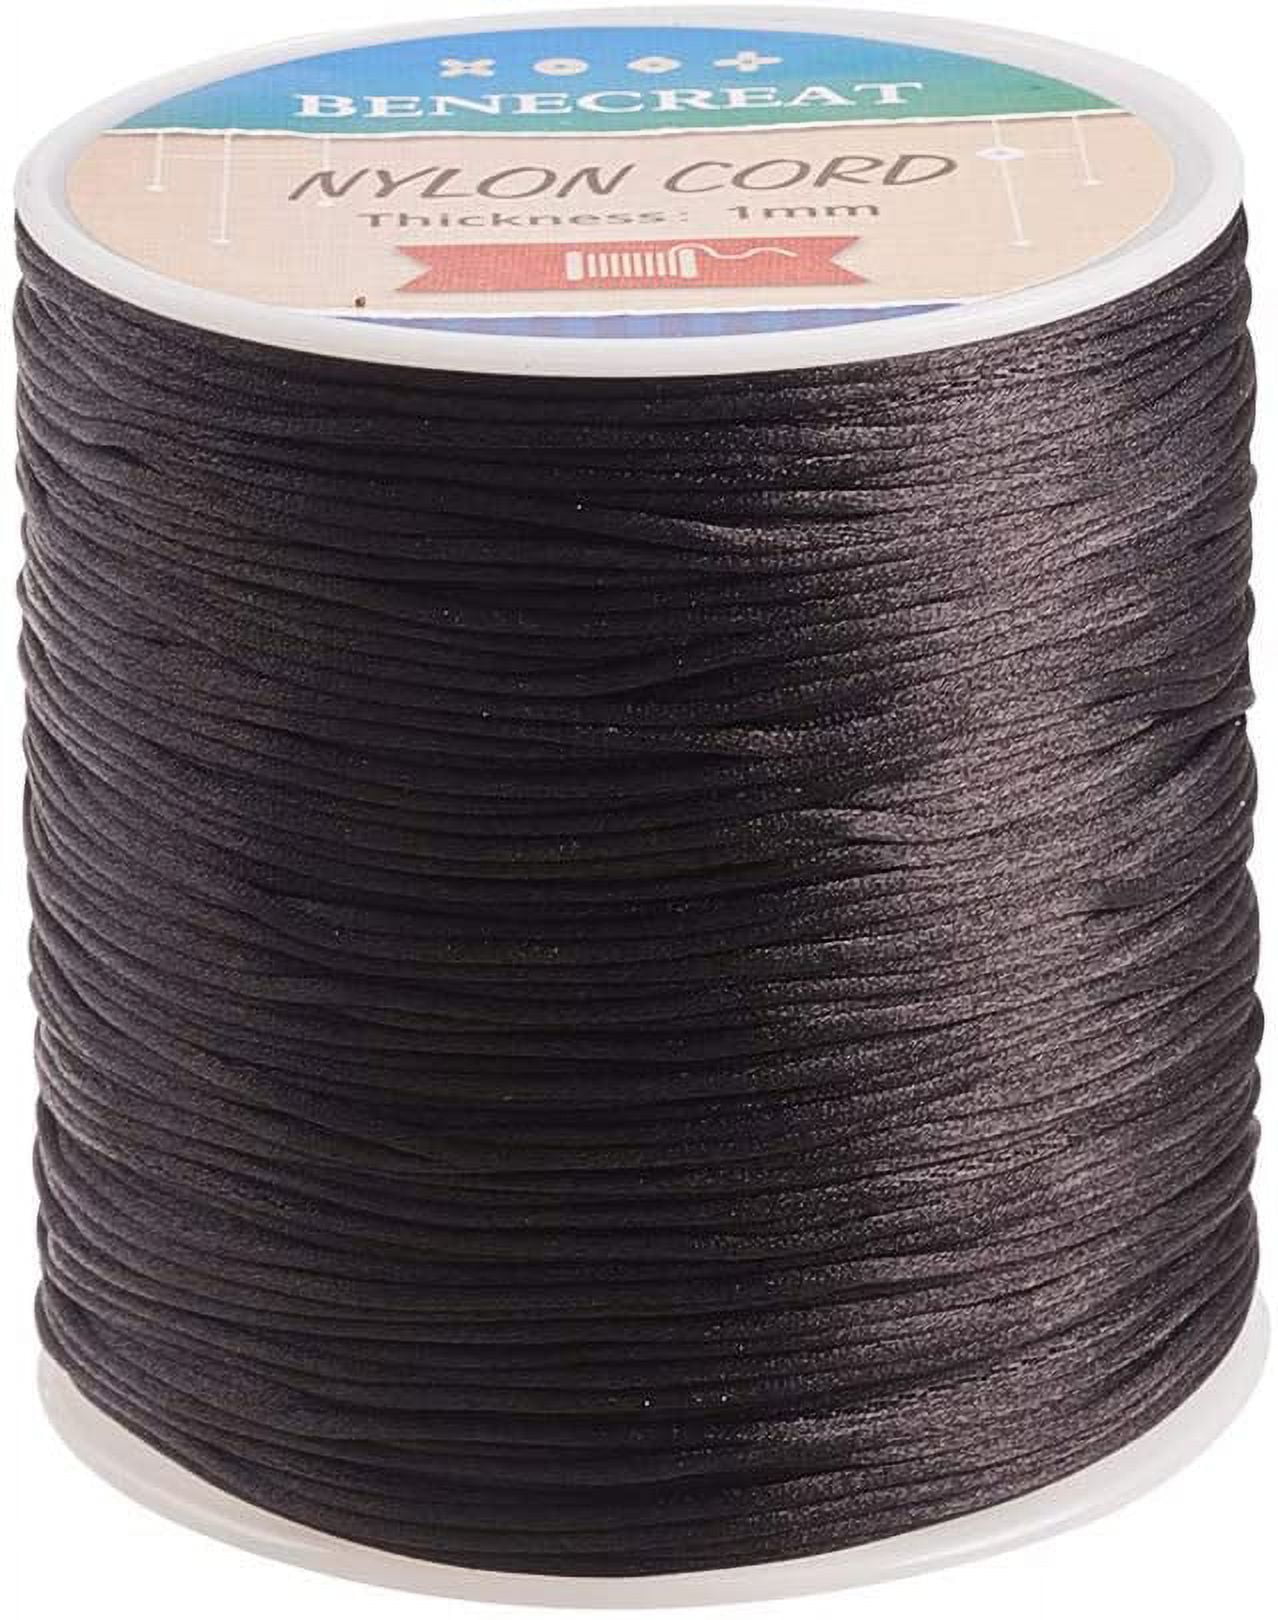 1mm 200M (218 Yards) Nylon Satin Thread Rattail Trim Cord for Beading  Chinese Knot Macrame Jewelry Making and Sewing - Black